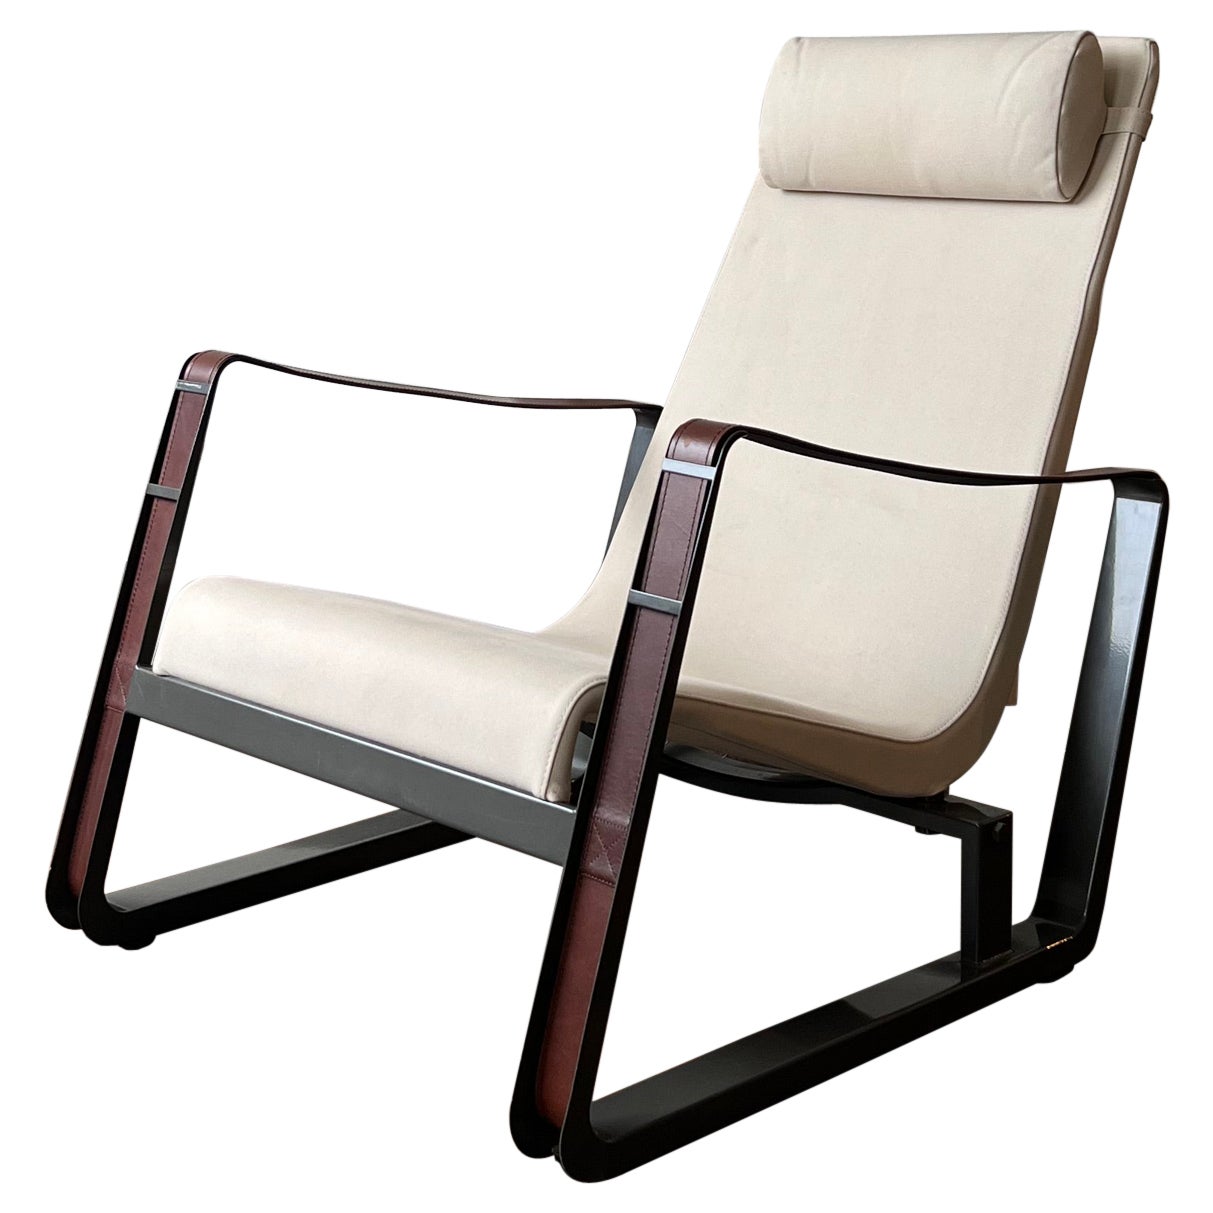 Jean Prouvé Cite Lounge Chair (Prouvé RAW Edition) by G Star Raw and Vitra For Sale